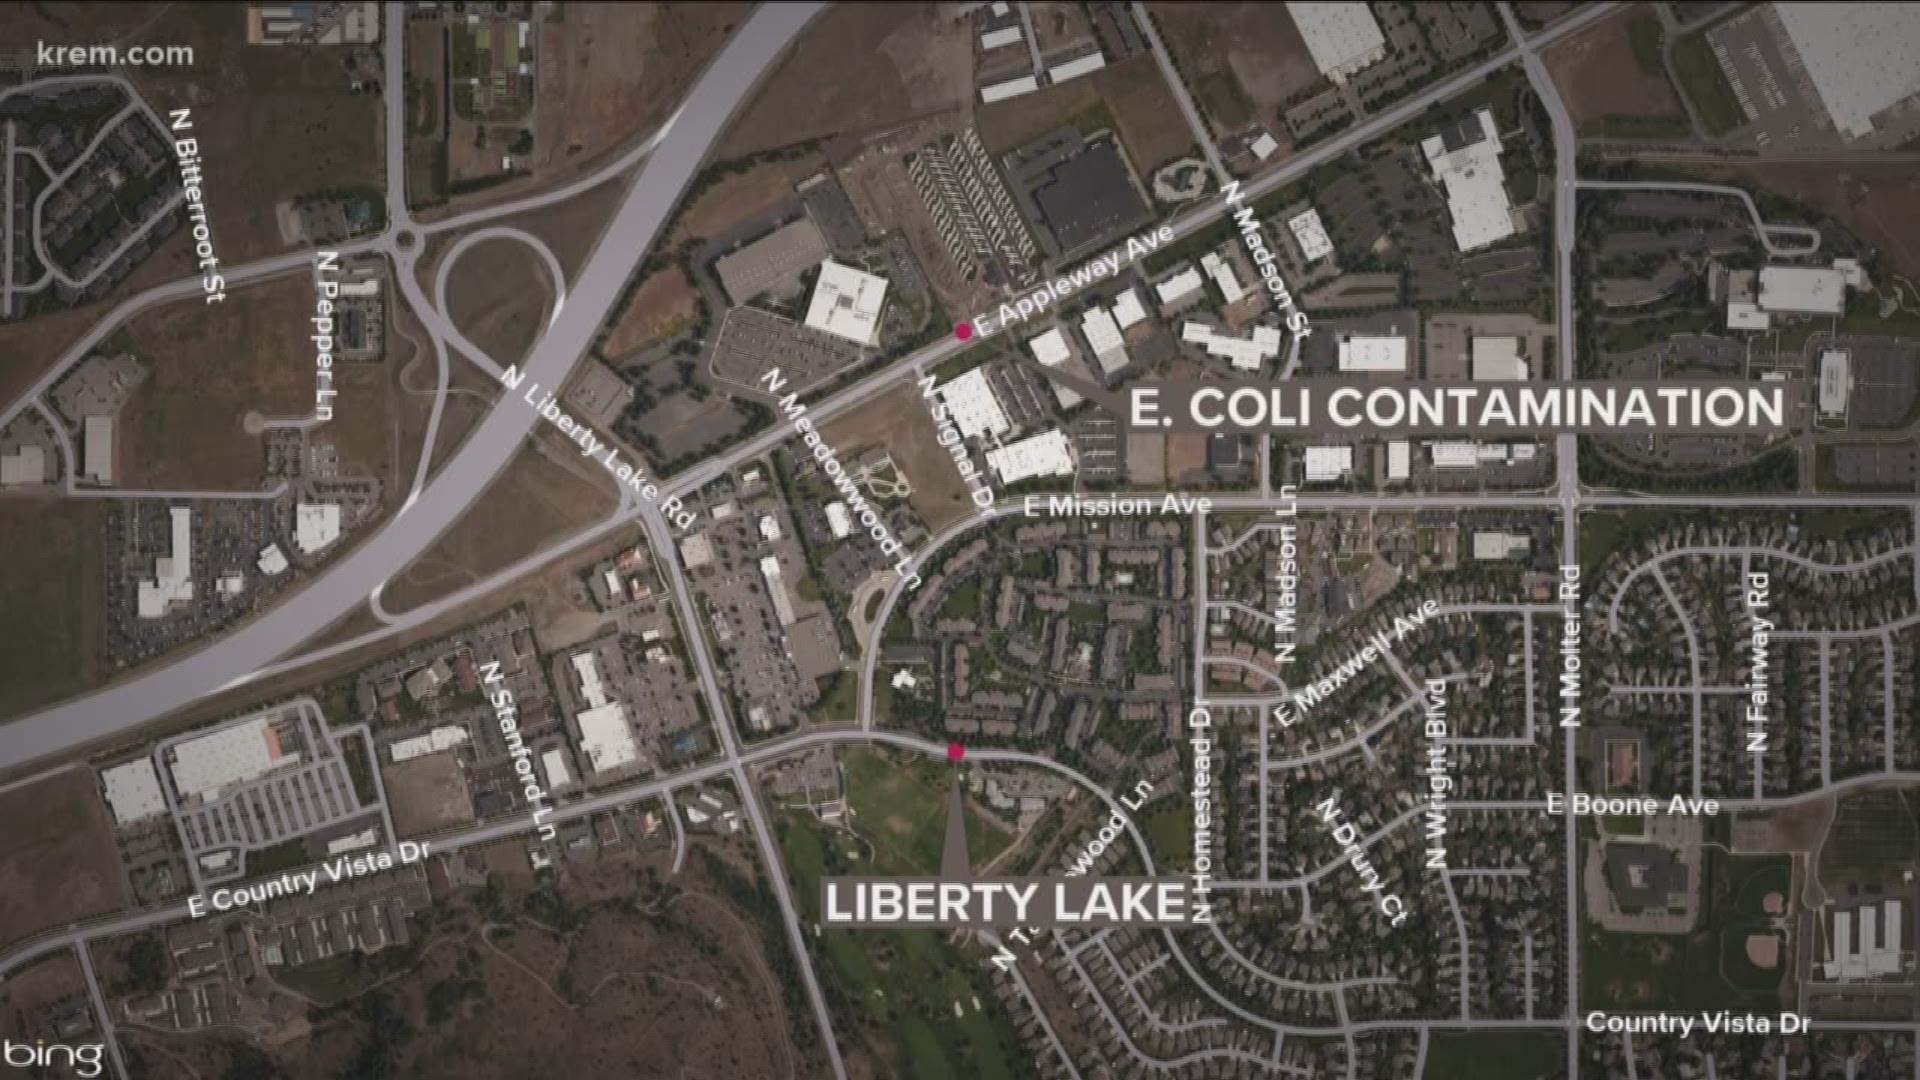 Liberty Lake Sewer and Water District customers are being asked to boil their water as a precaution.